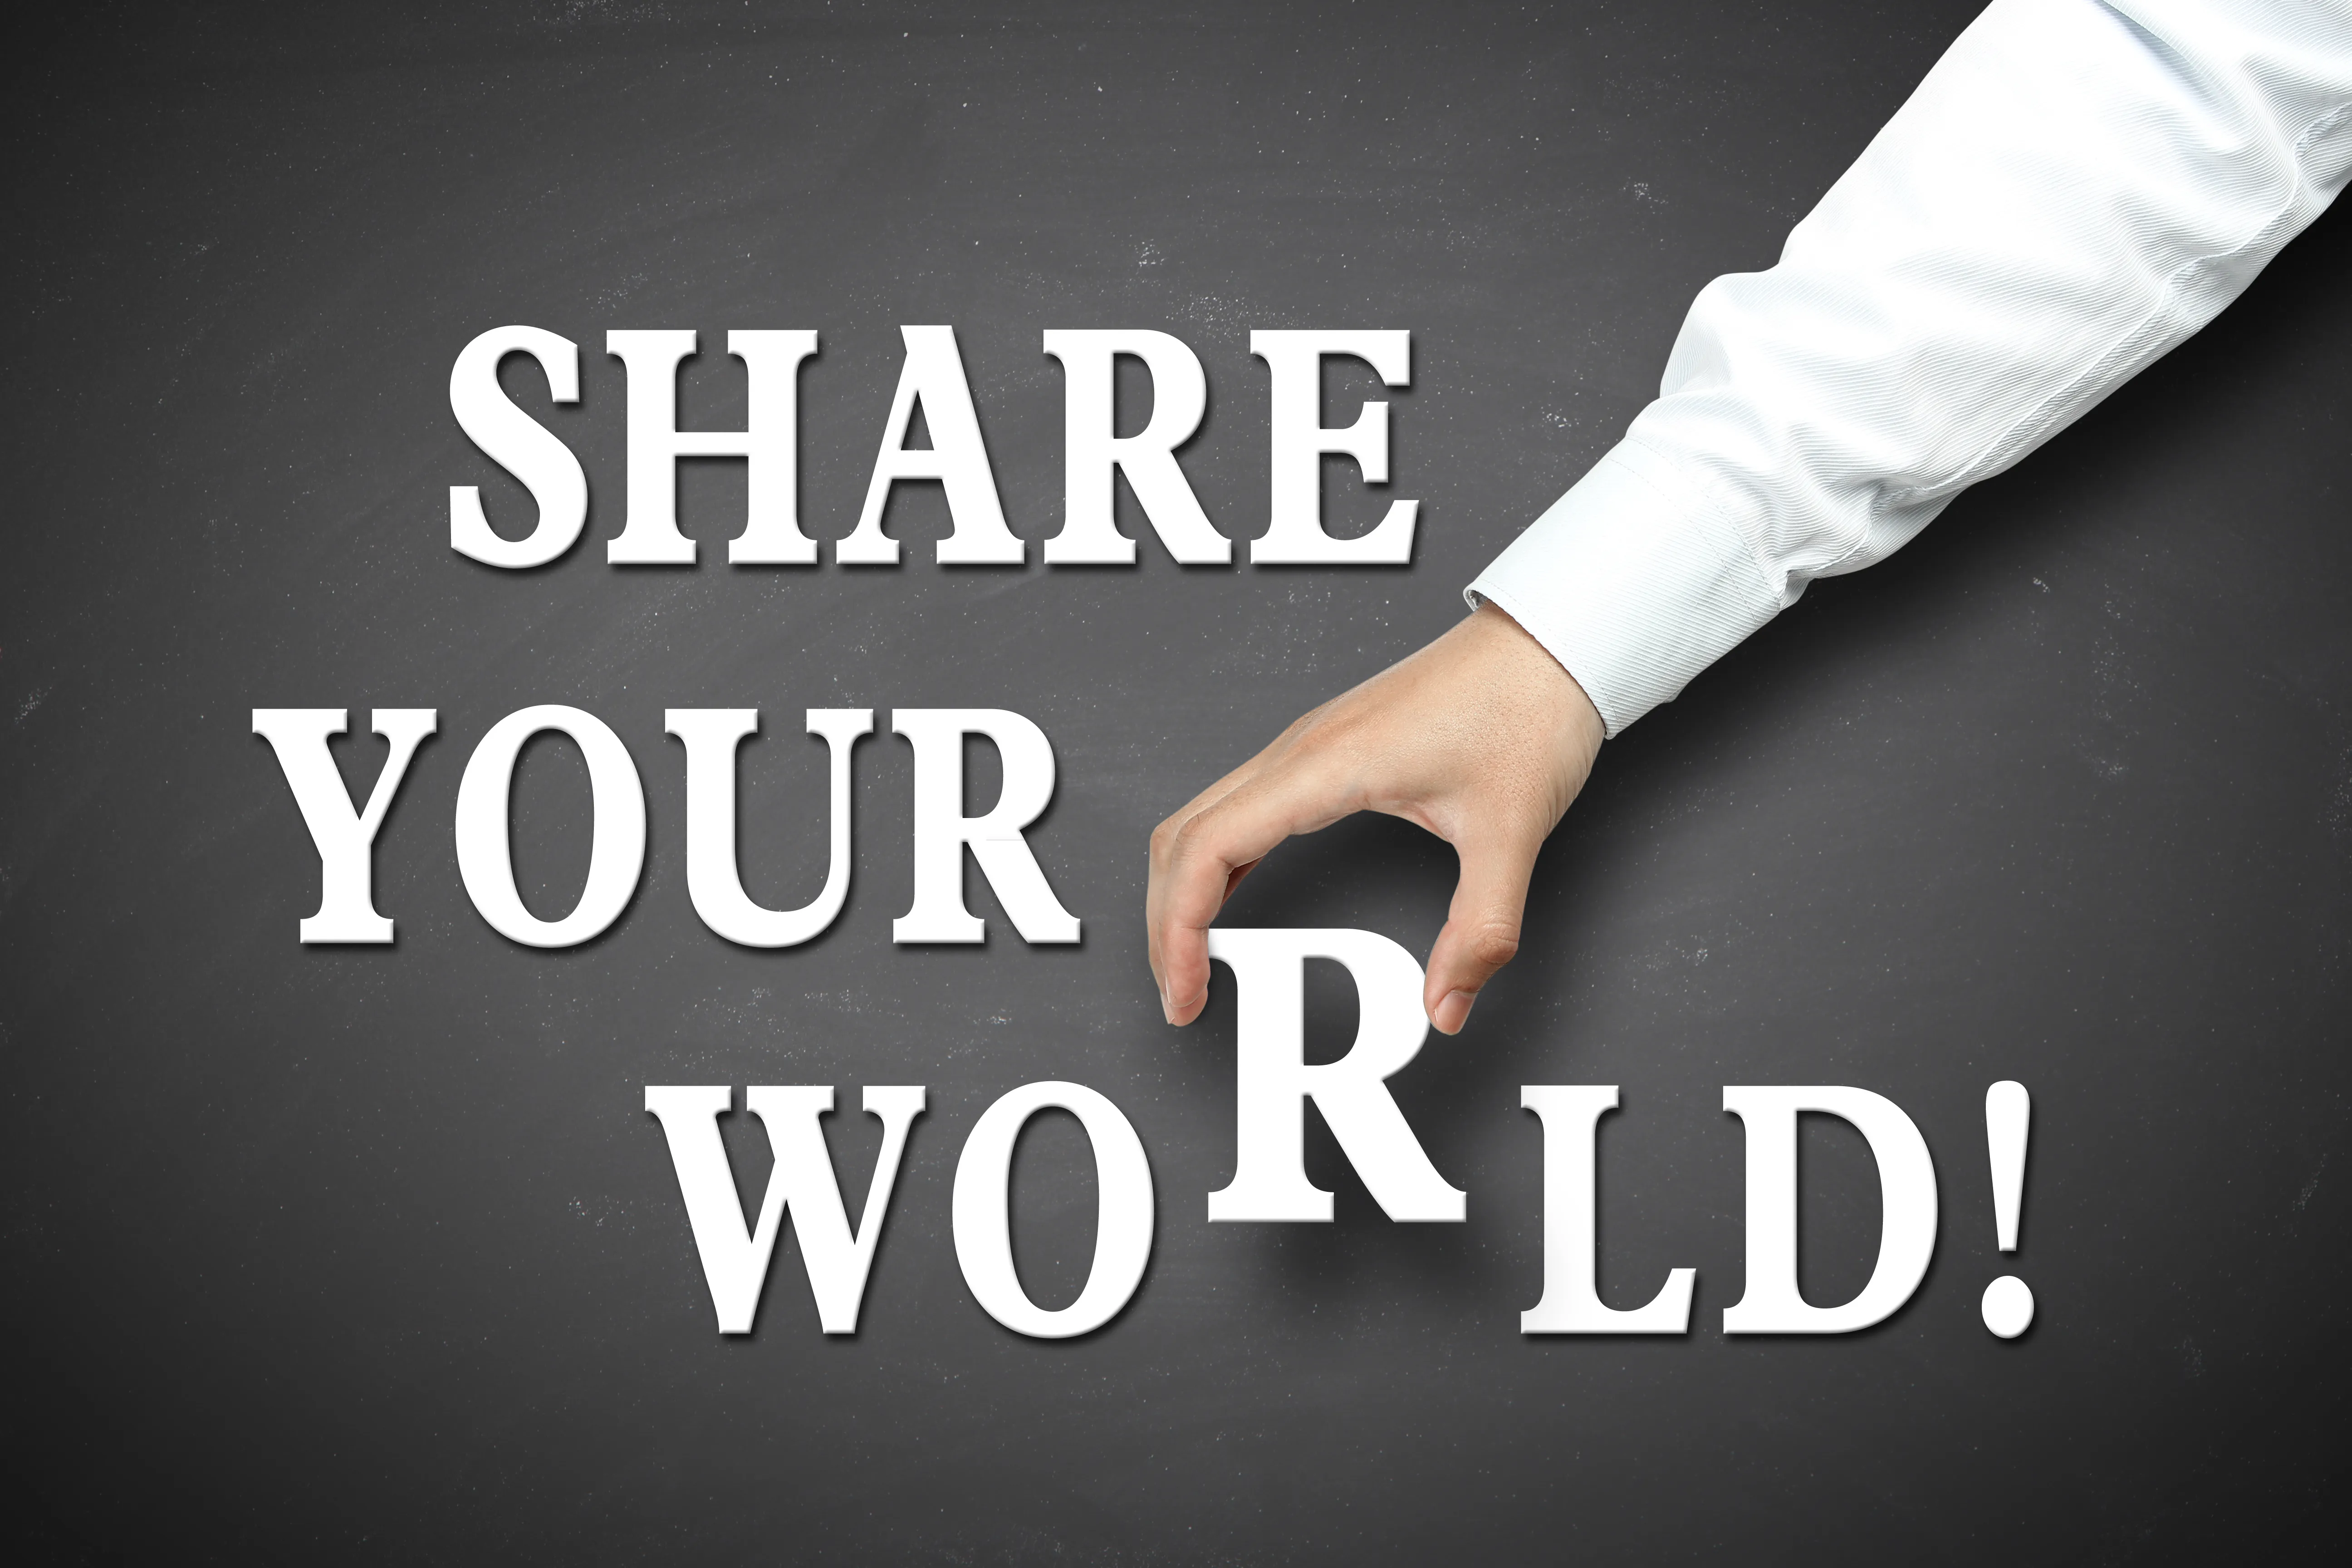 Words "share your world!" on a grey background with a hand picking up the letter 'r' in world